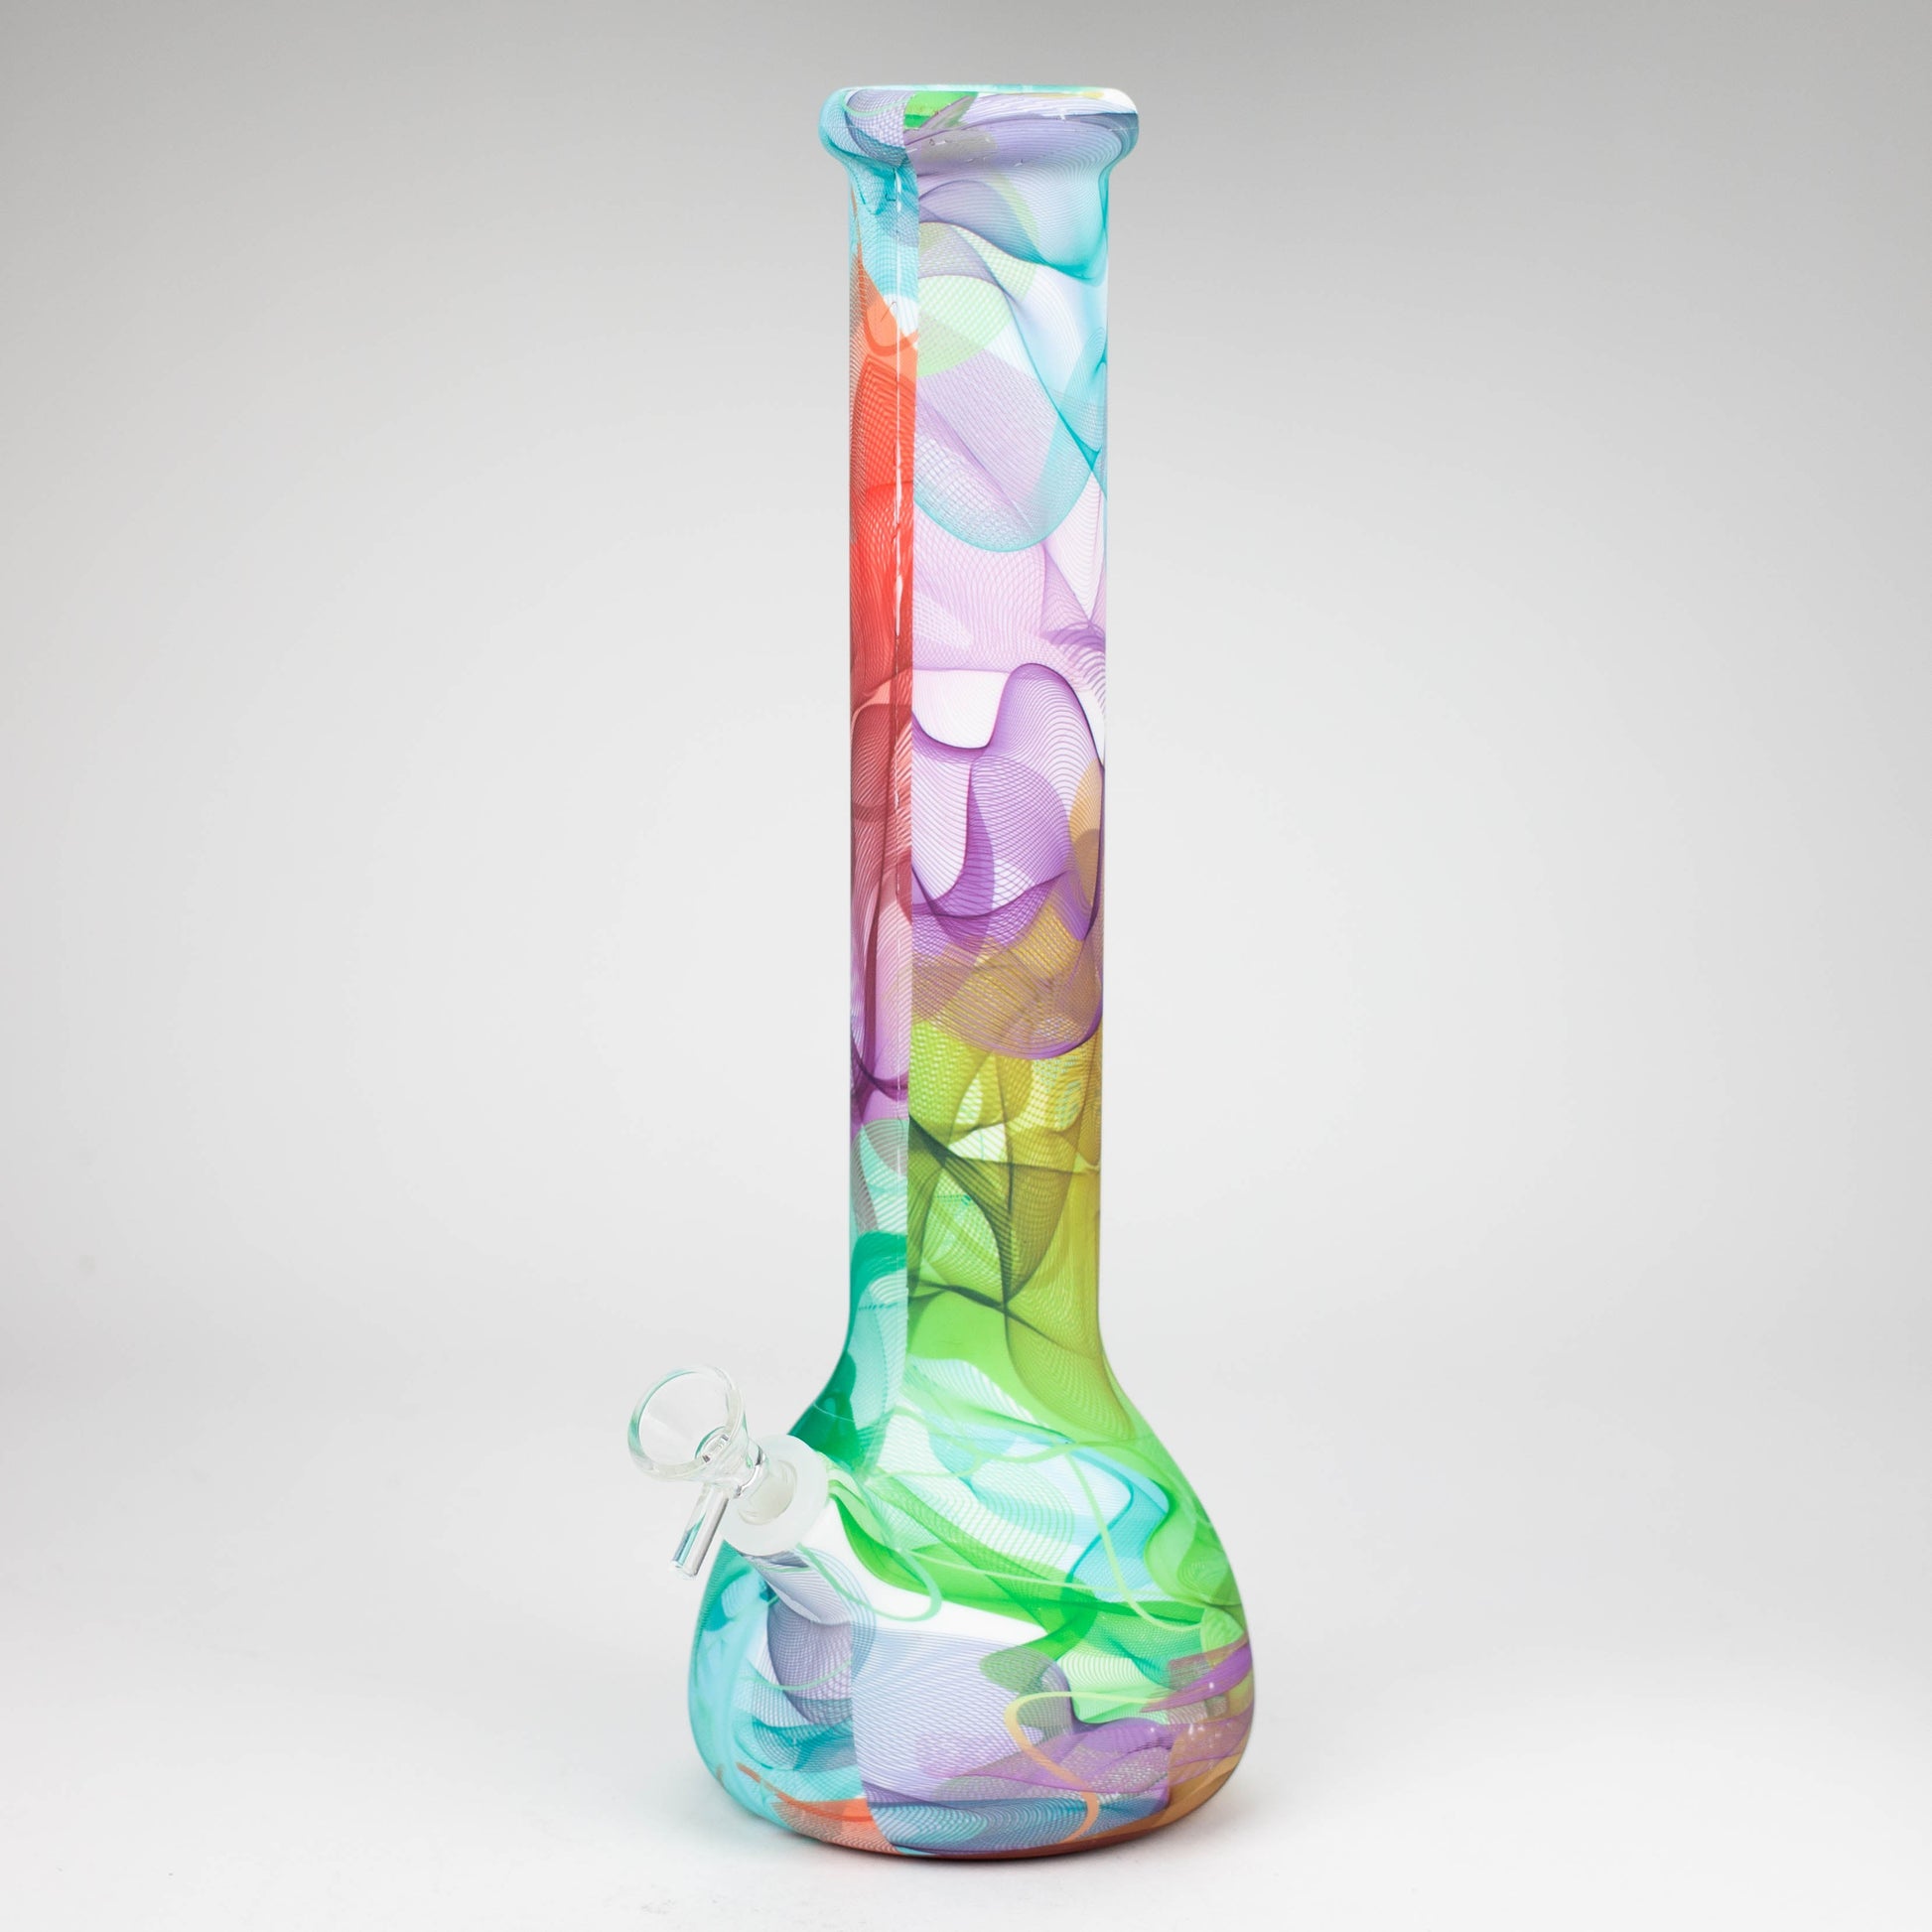 15" detachable silicone water bong - Assorted [093B]_1